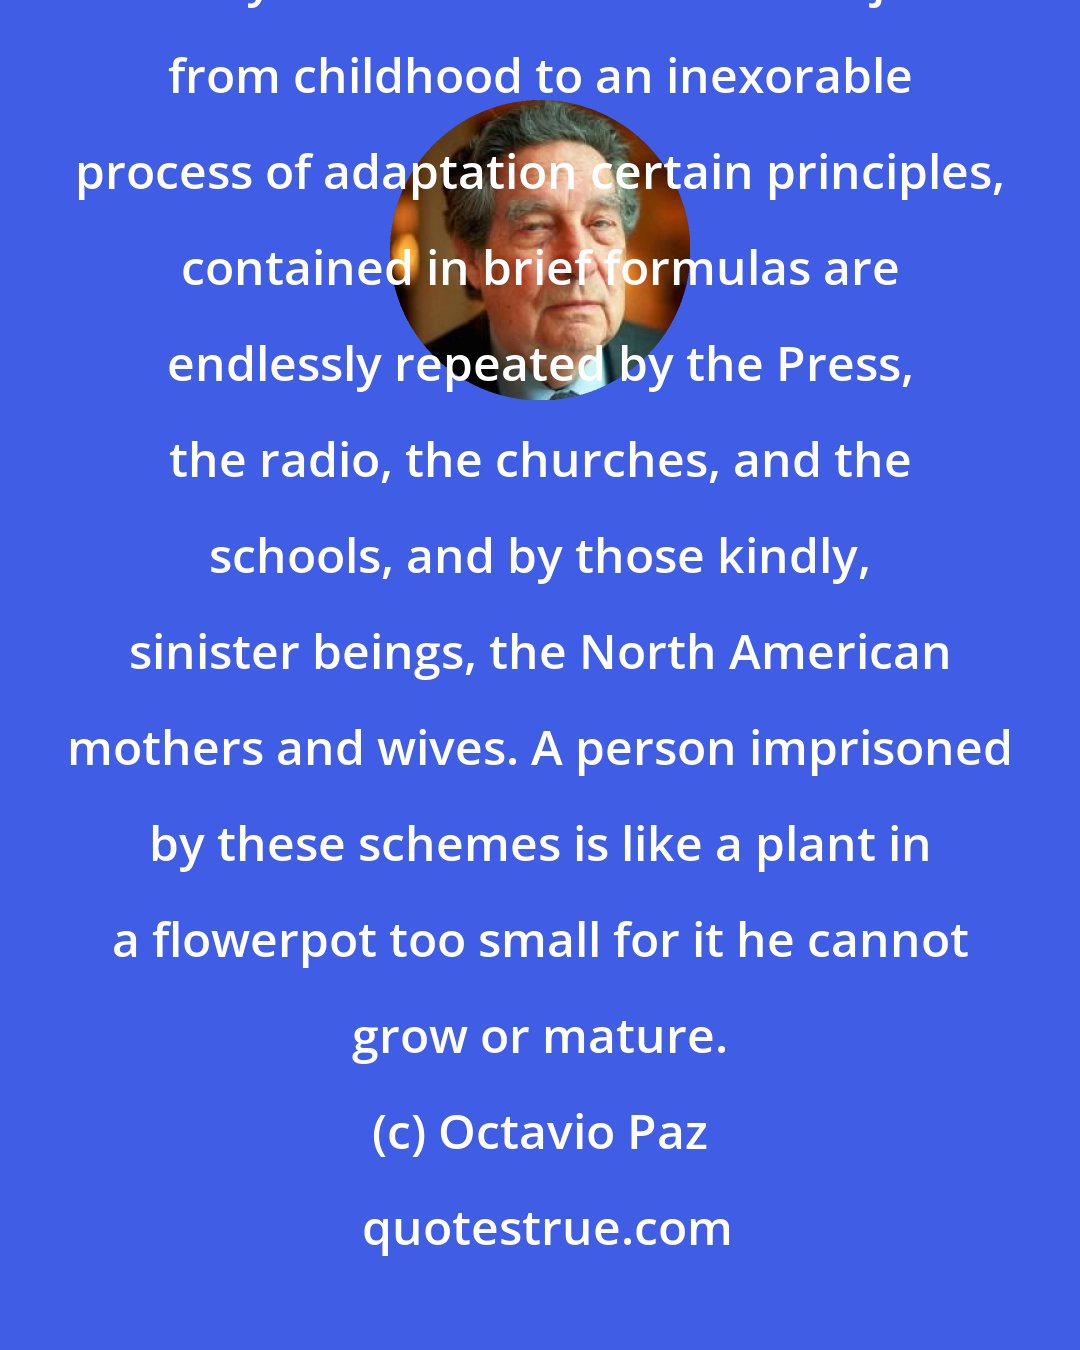 Octavio Paz: The North American system only wants to consider the positive aspects of reality. Men and women are subjected from childhood to an inexorable process of adaptation certain principles, contained in brief formulas are endlessly repeated by the Press, the radio, the churches, and the schools, and by those kindly, sinister beings, the North American mothers and wives. A person imprisoned by these schemes is like a plant in a flowerpot too small for it he cannot grow or mature.